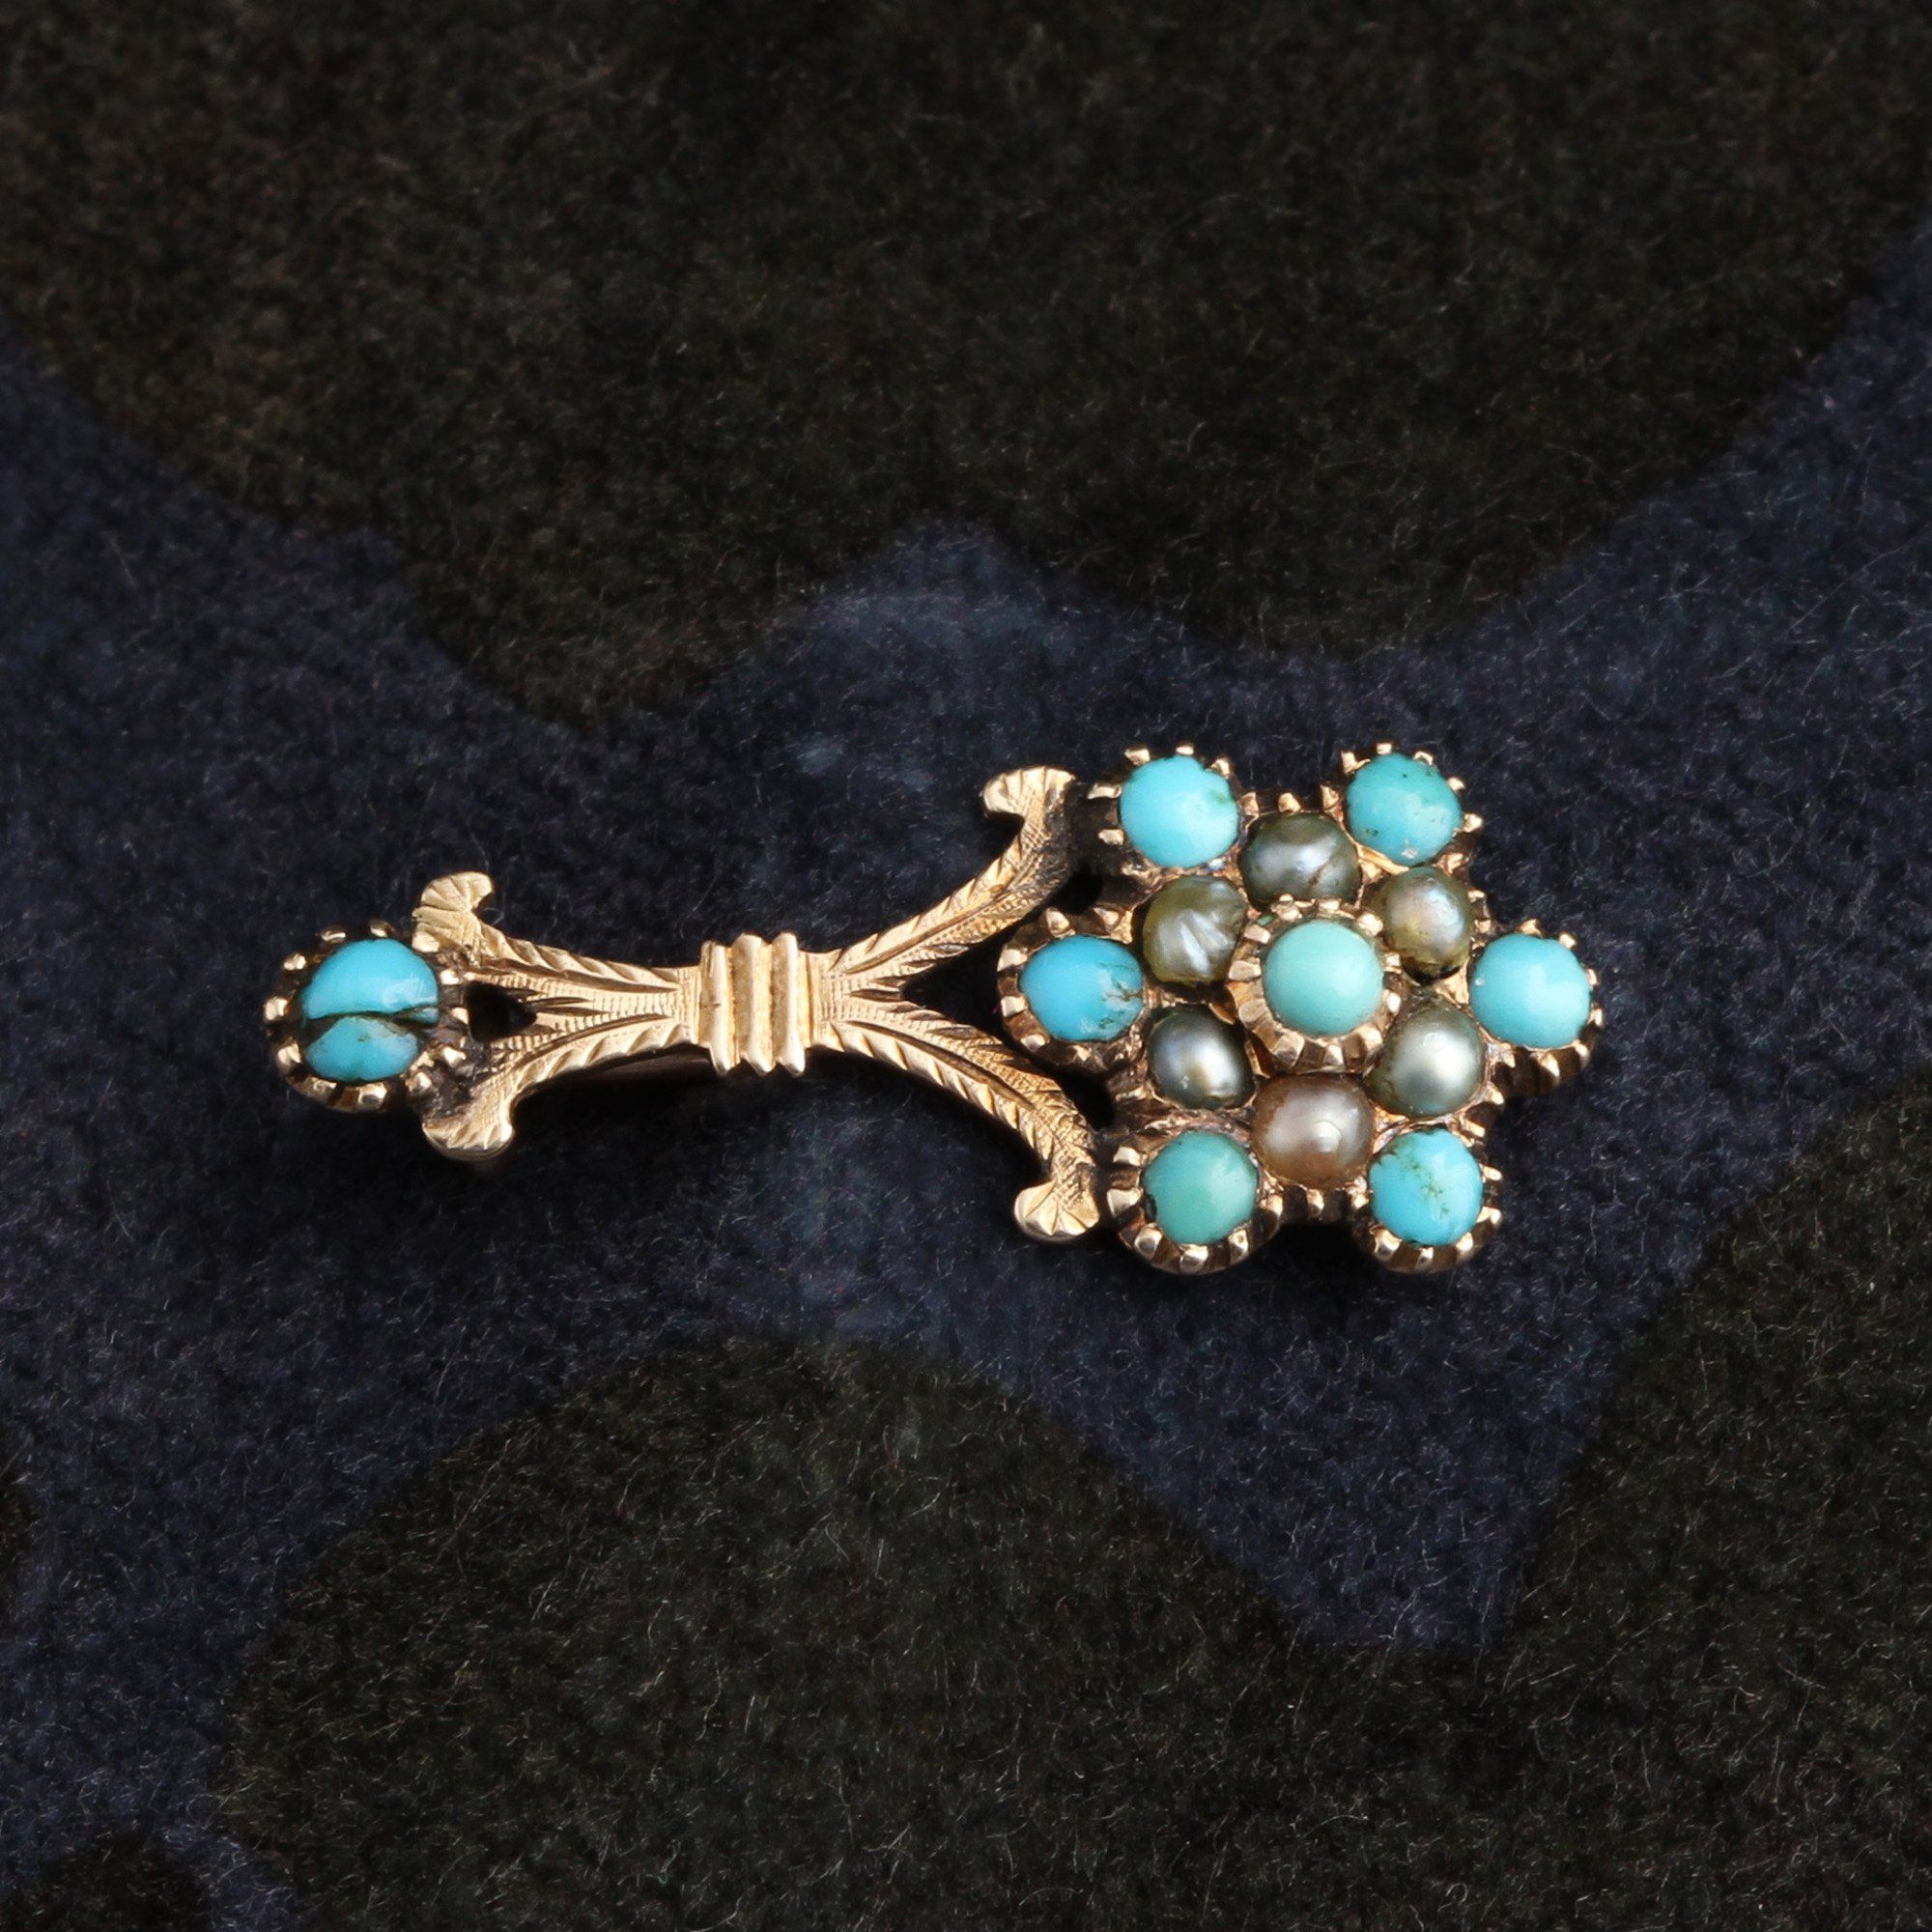 Front detail of Georgian Turquoise and Pearl Halley's Comet Brooch